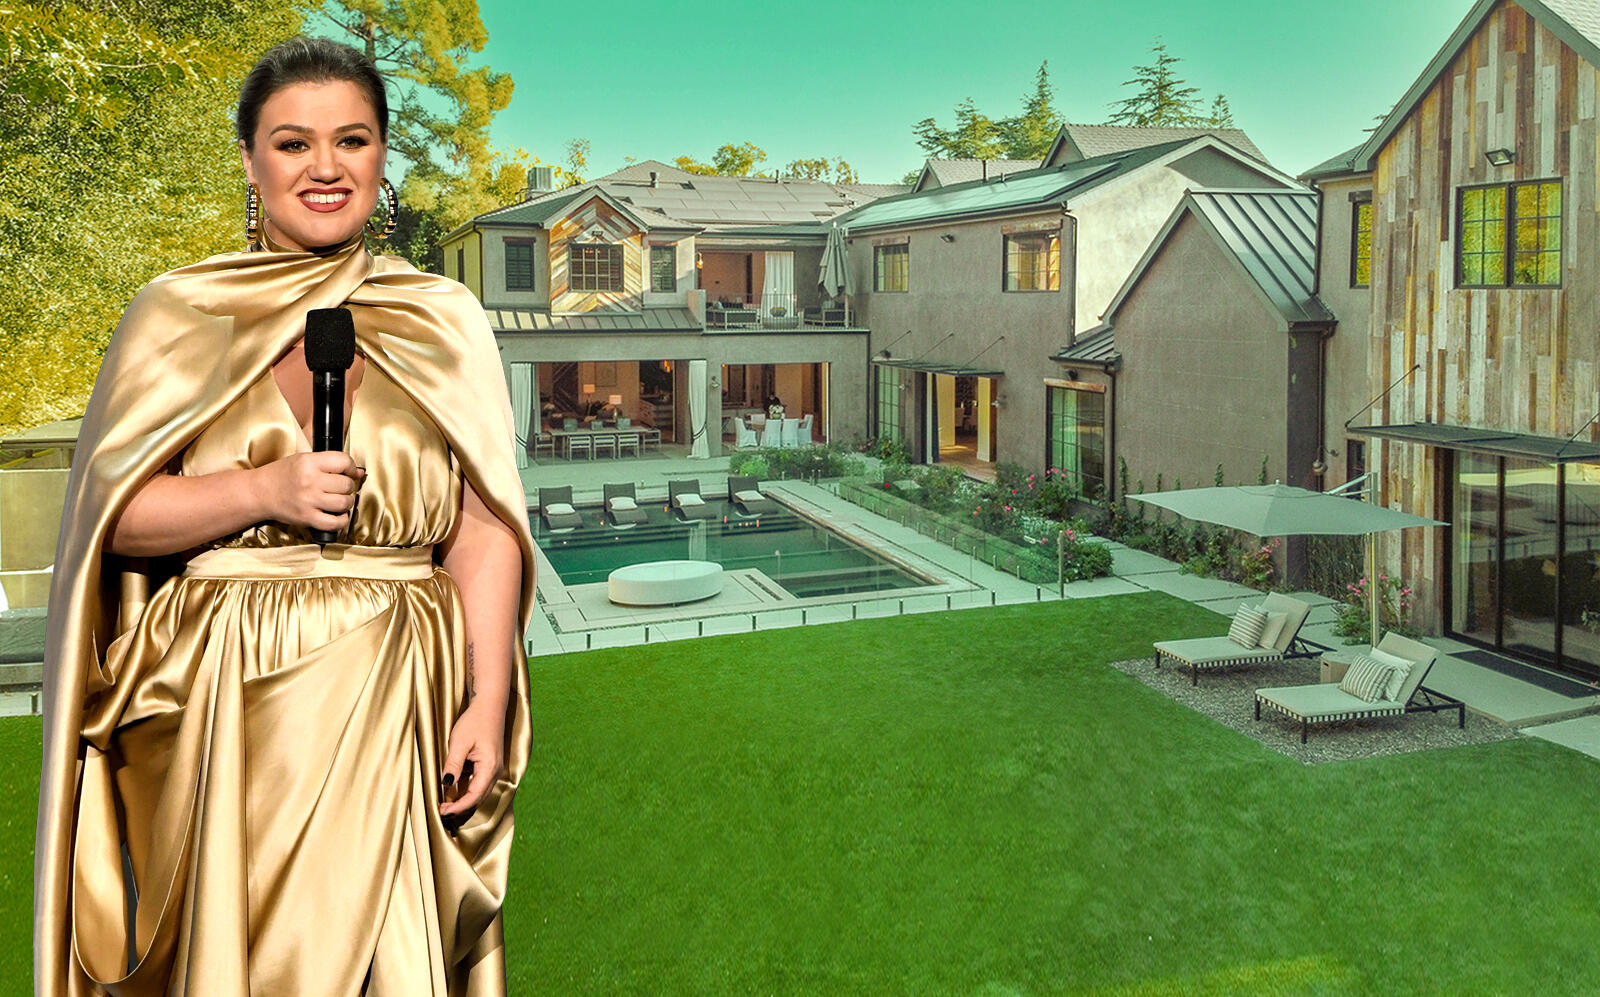 Kelly Clarkson and the Encino property (Getty, Compass)